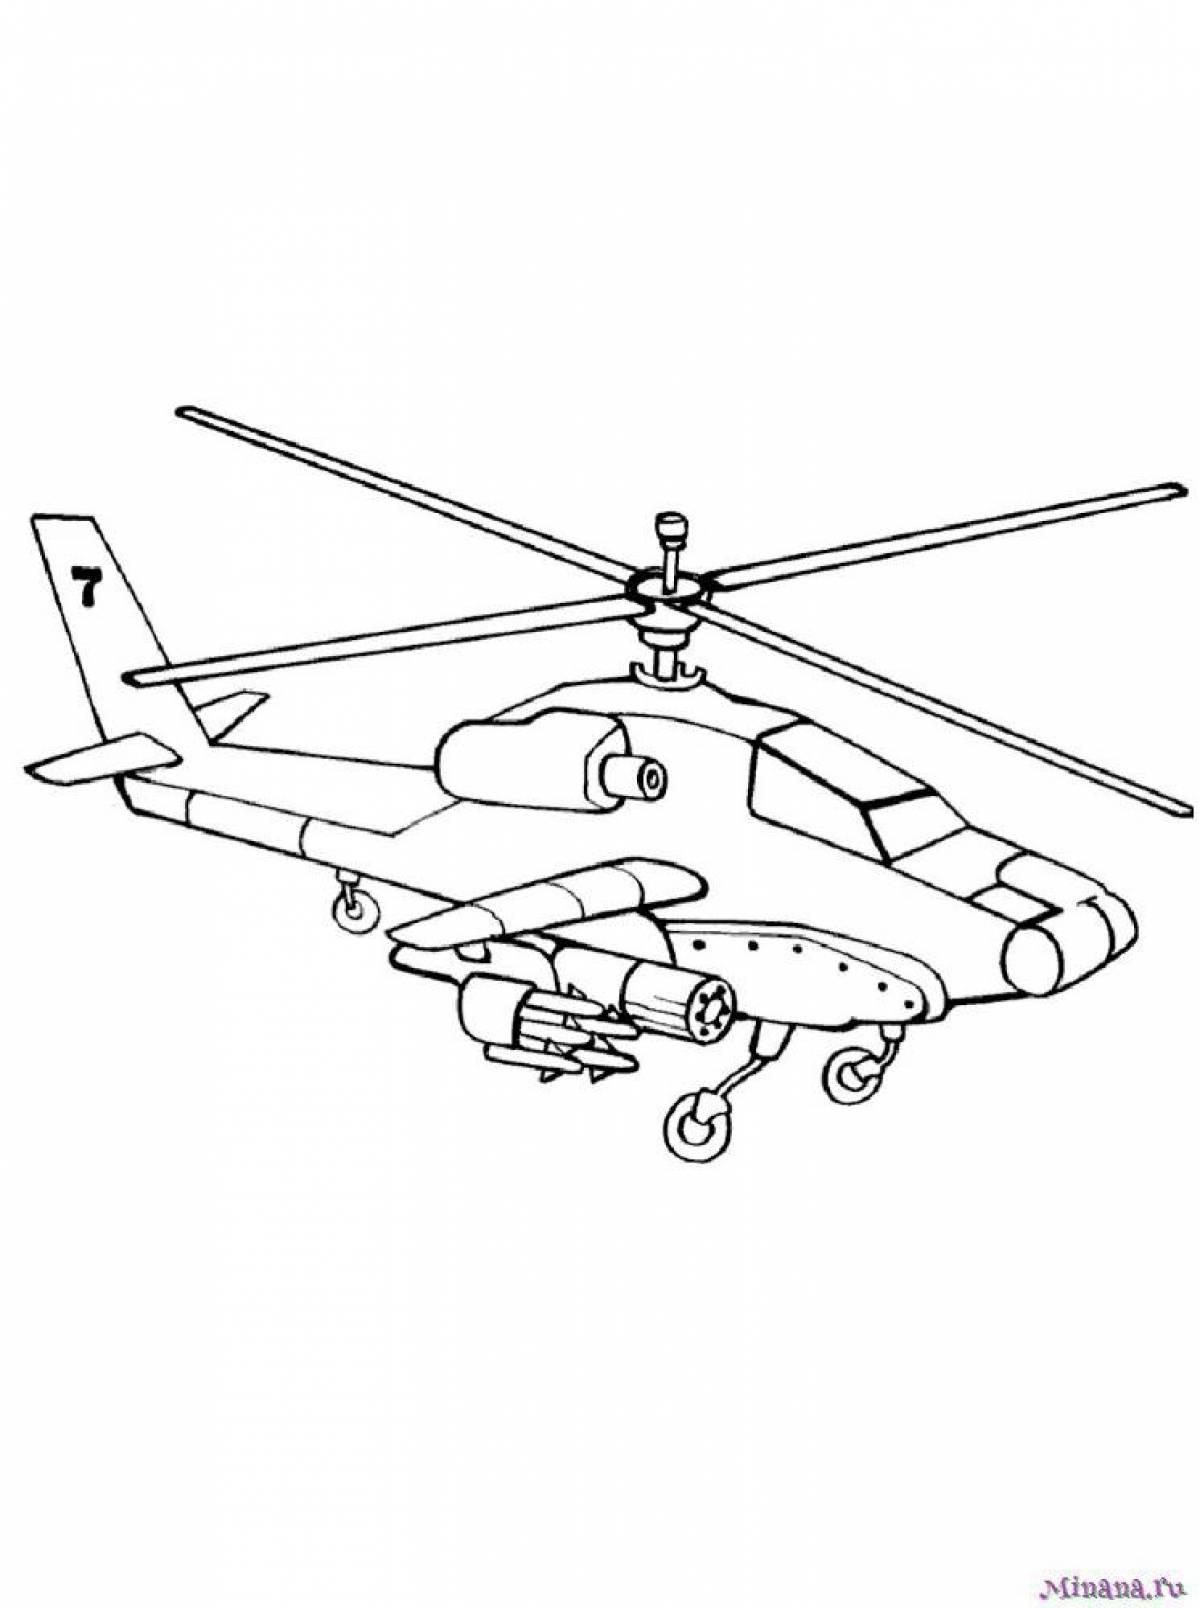 Military helicopter #10